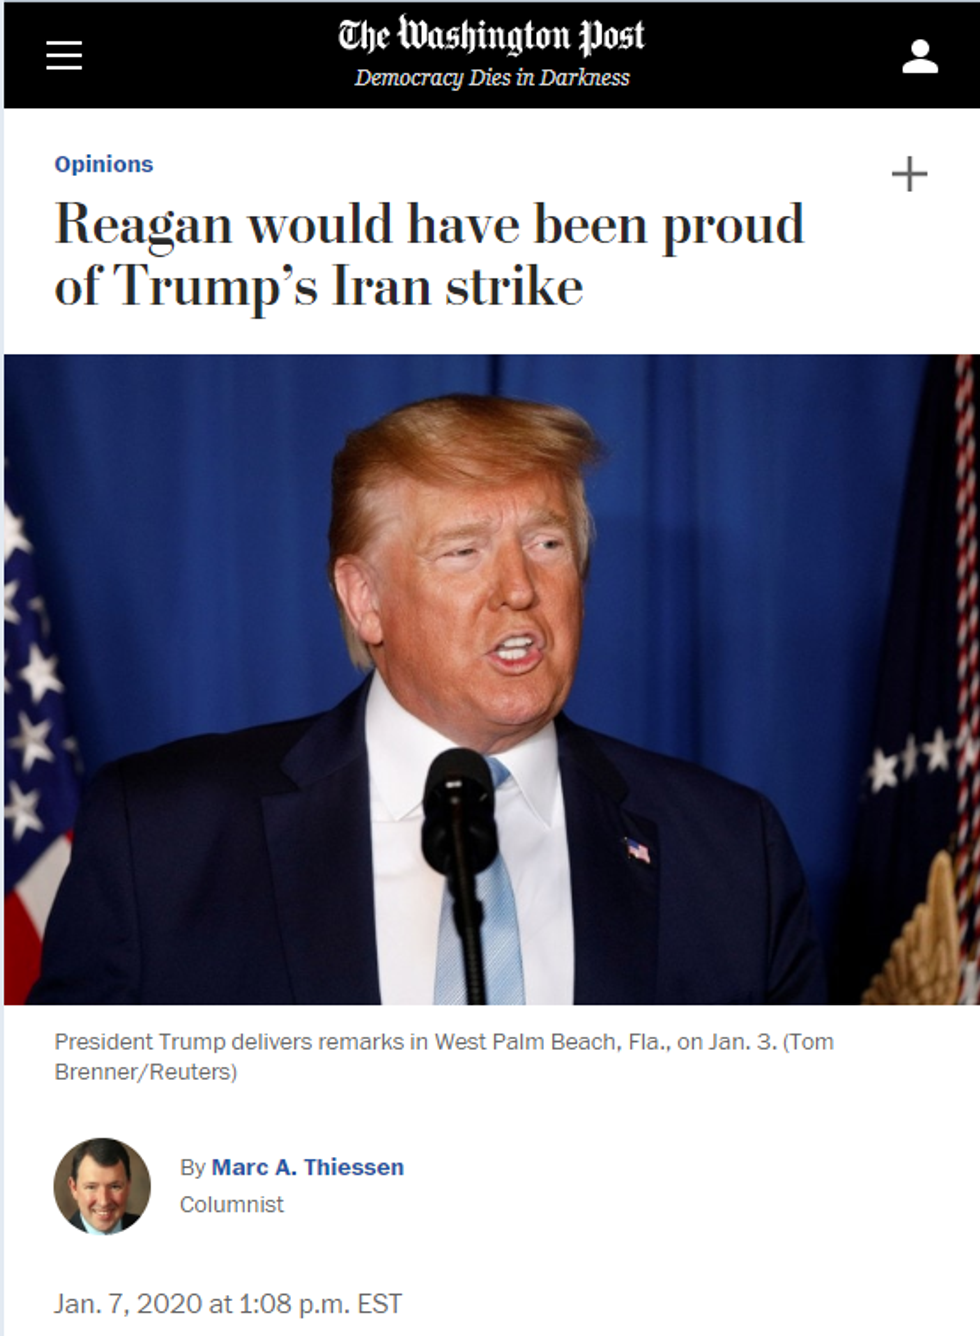 WaPo: Reagan would have been proud of Trump's Iran strike